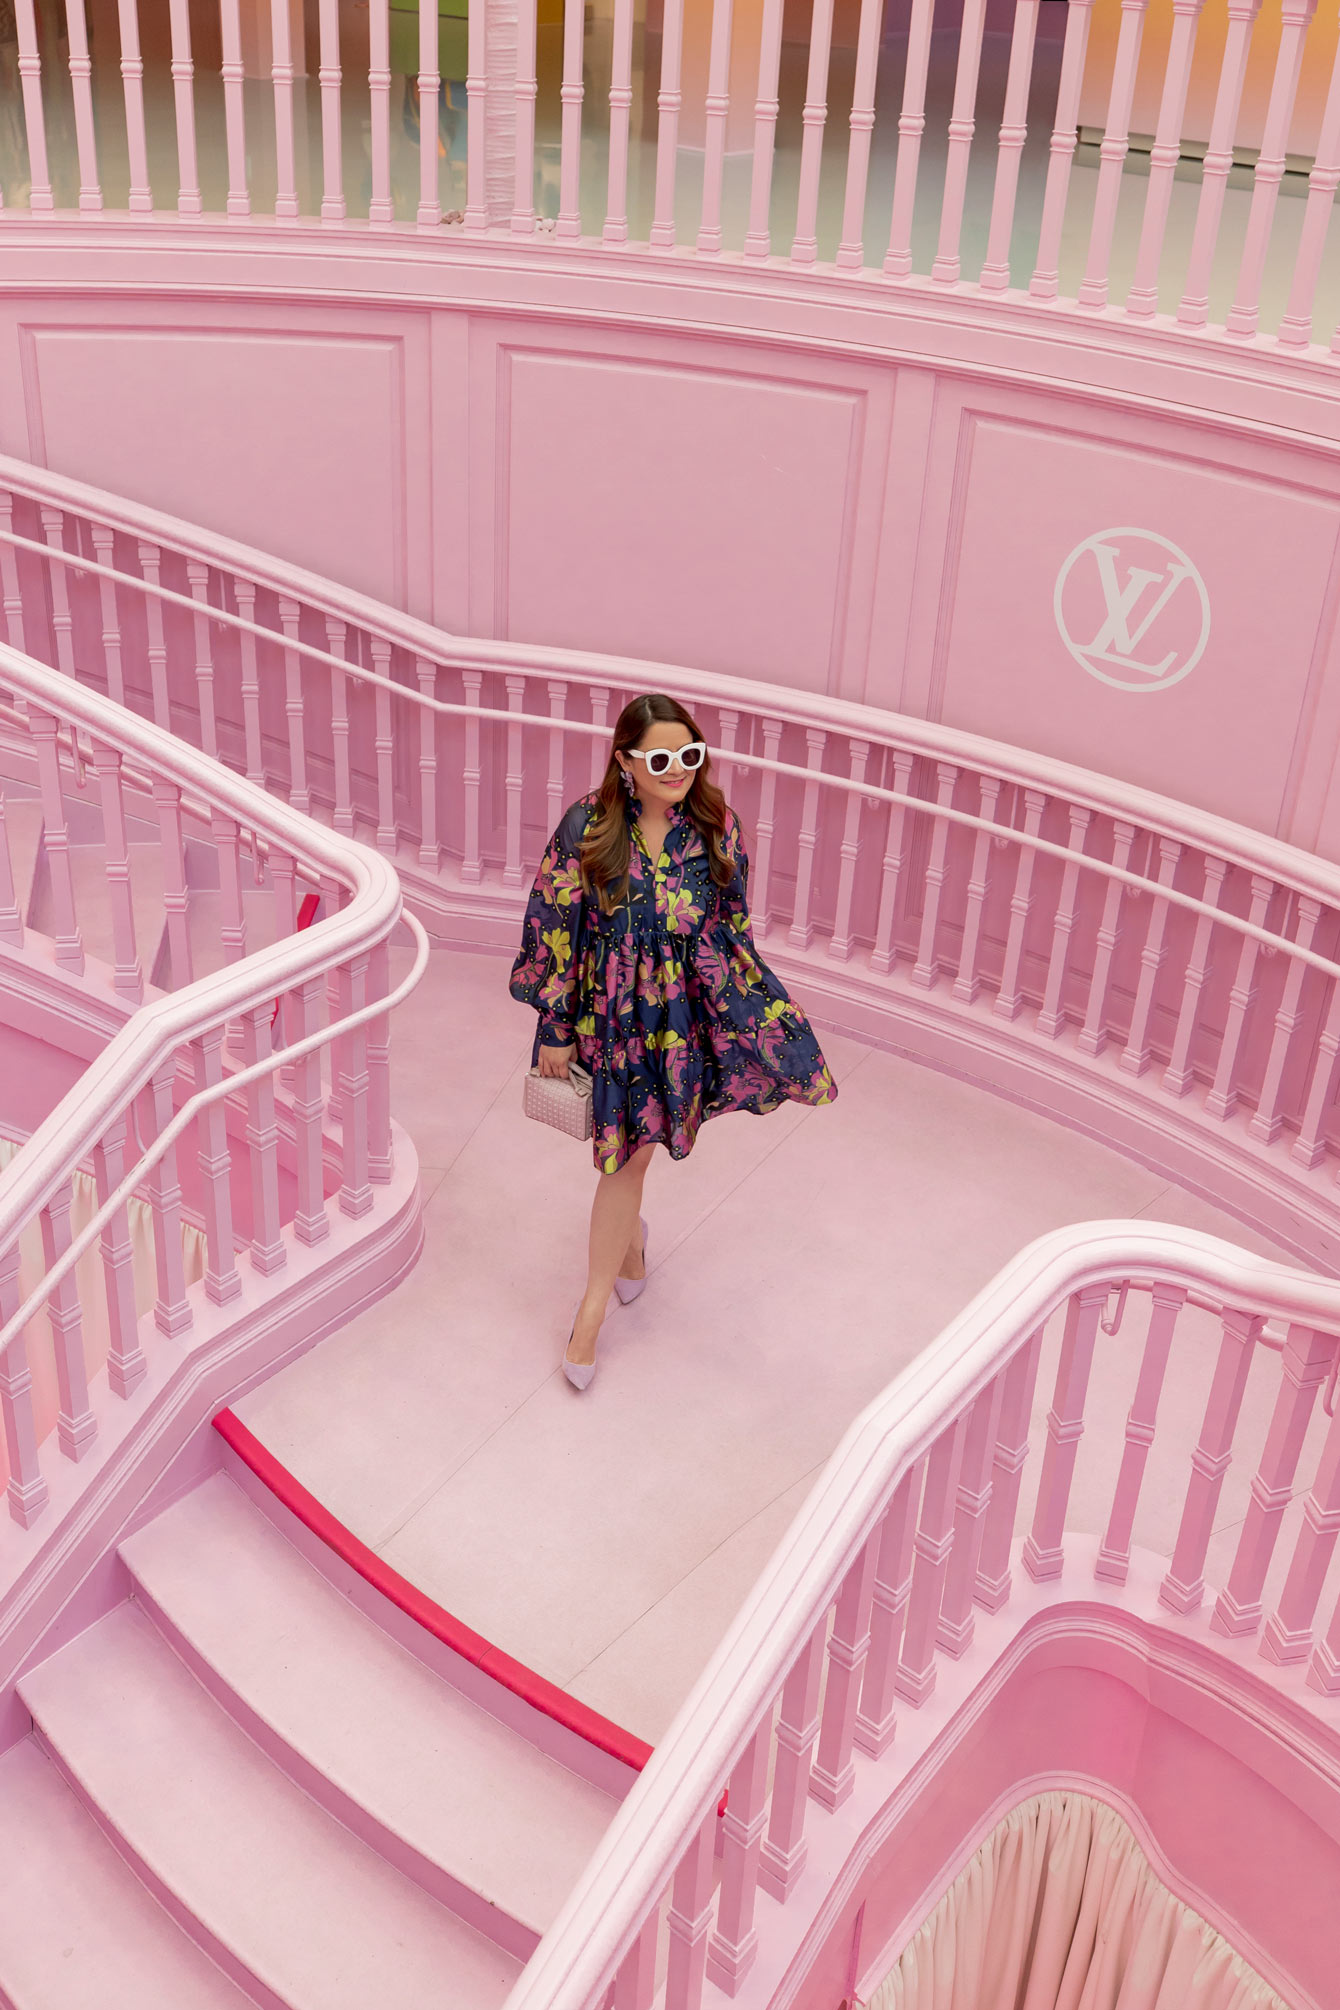 Eight Reasons to Be Obsessed with Louis Vuitton's LA Exhibit - Racked LA